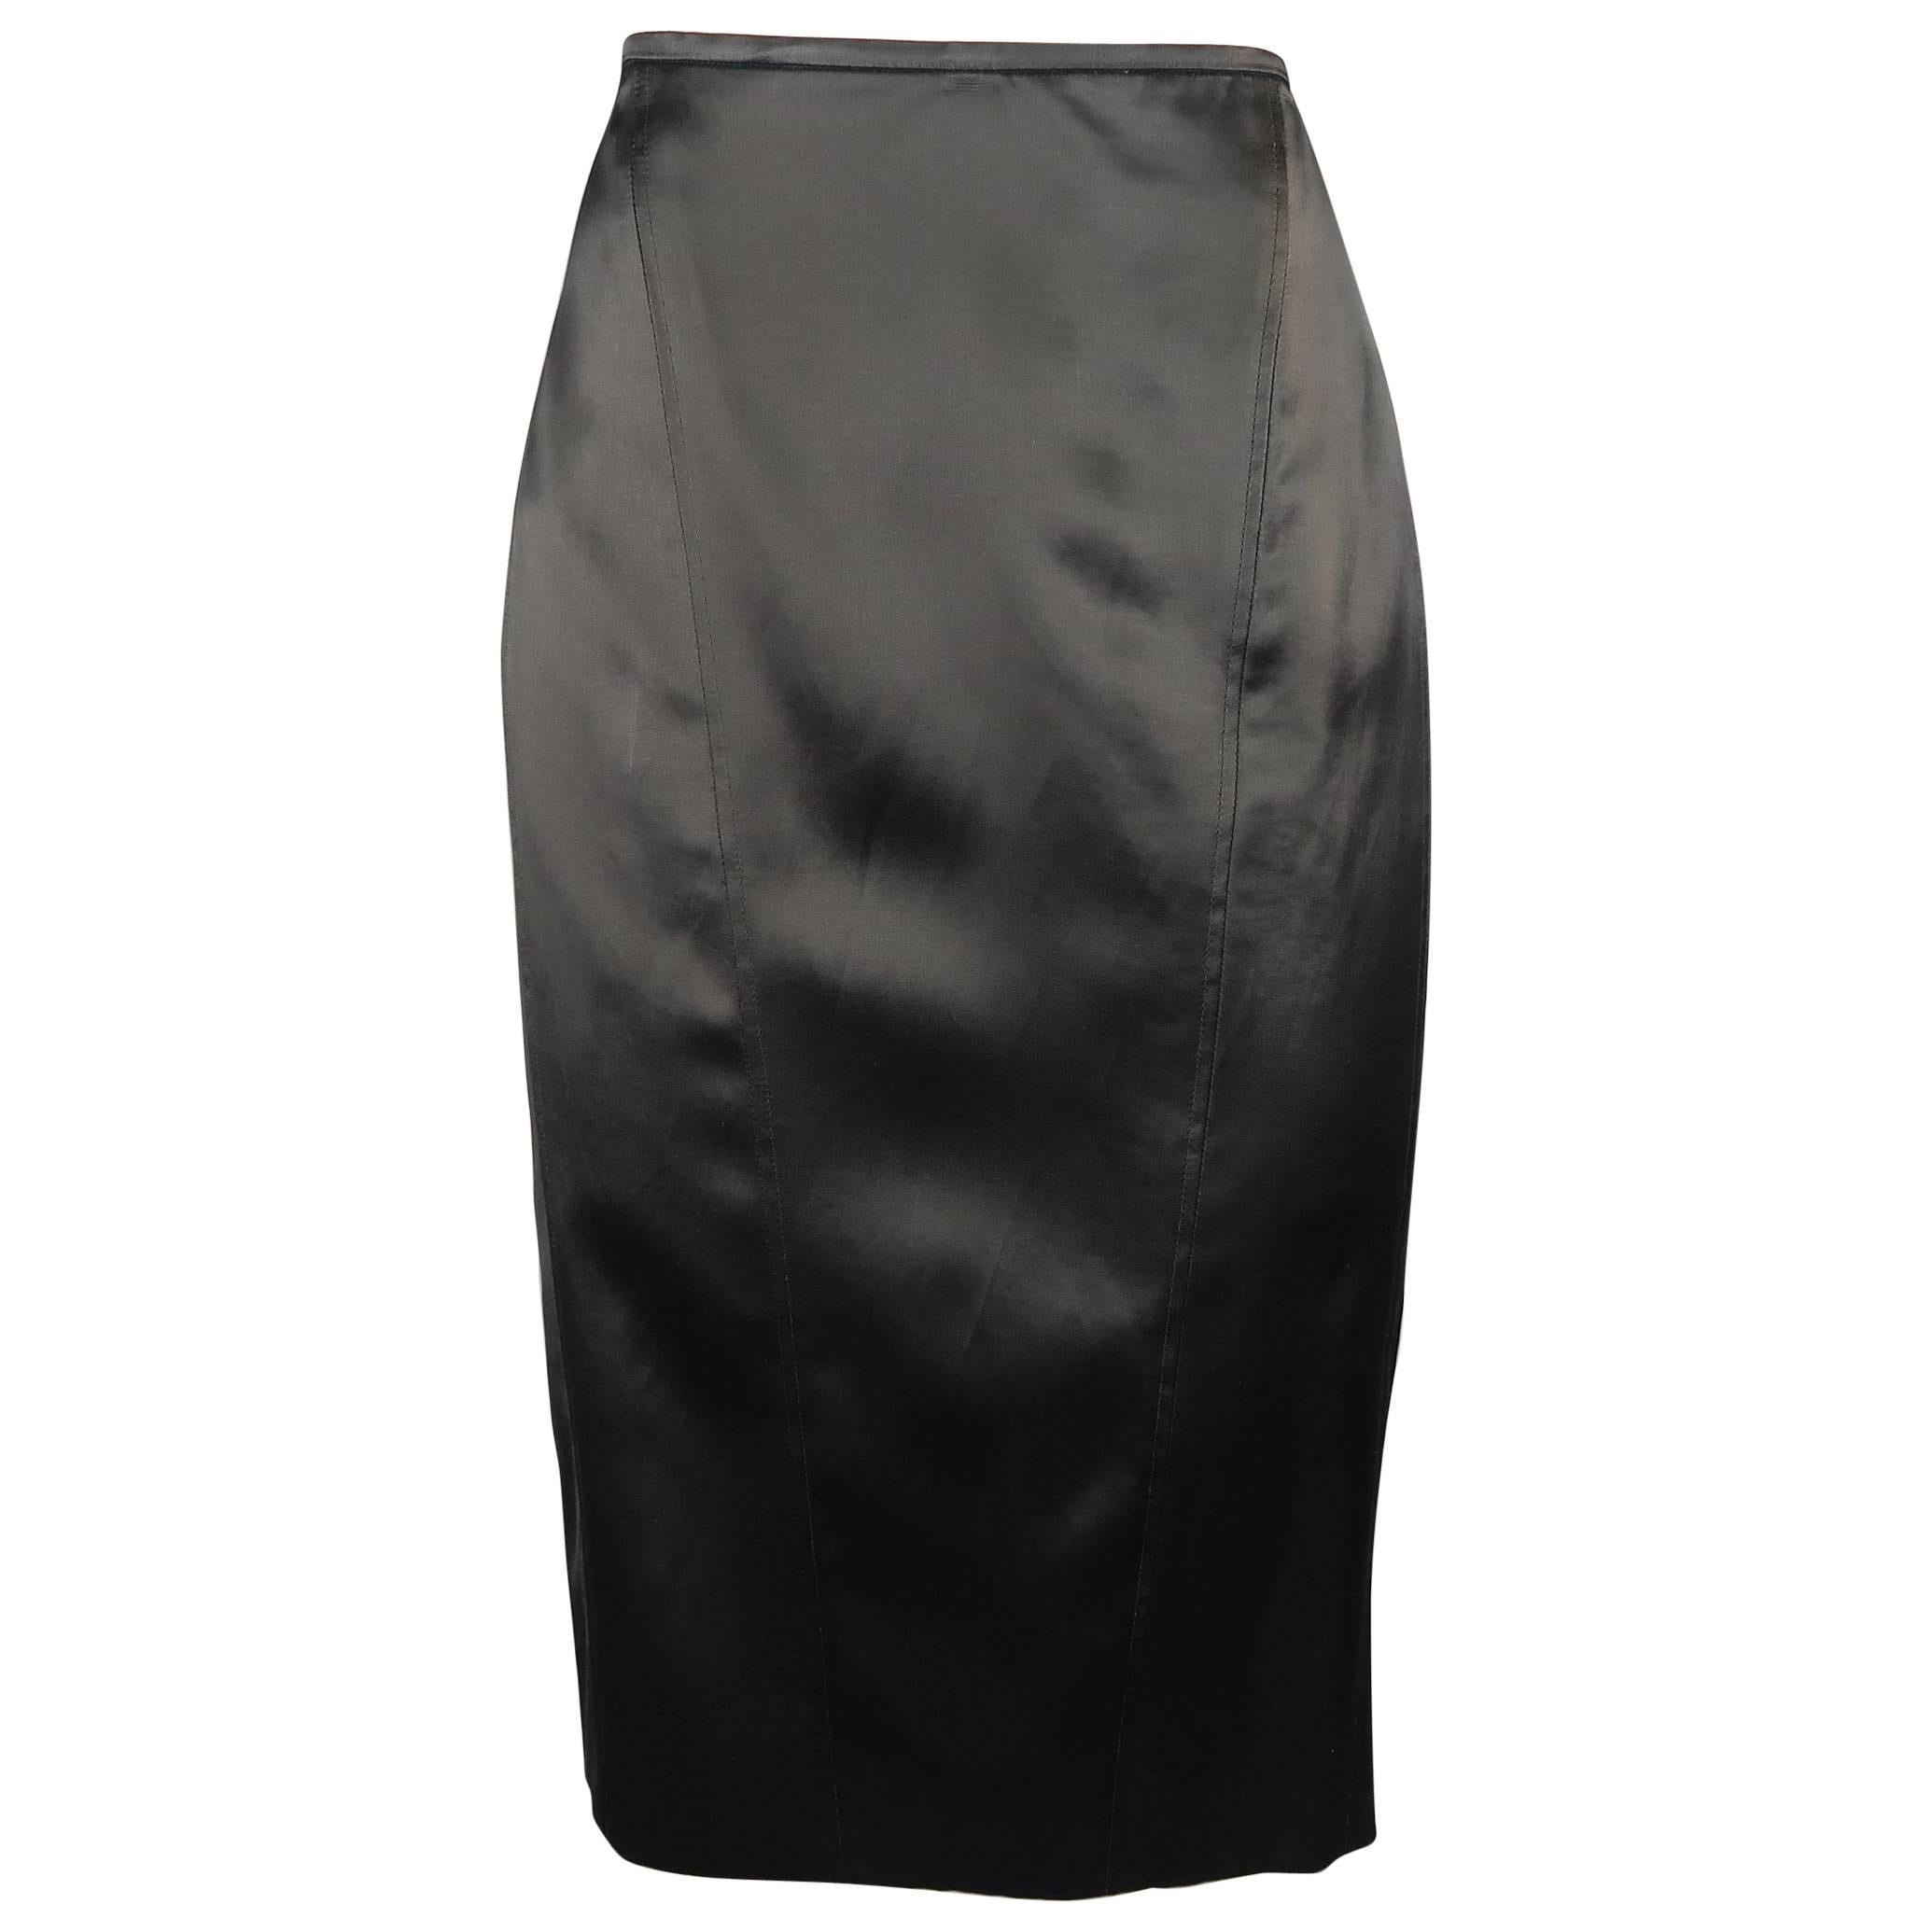 GUCCI by TOM FORD Size 4 Black Satin Pencil Skirt